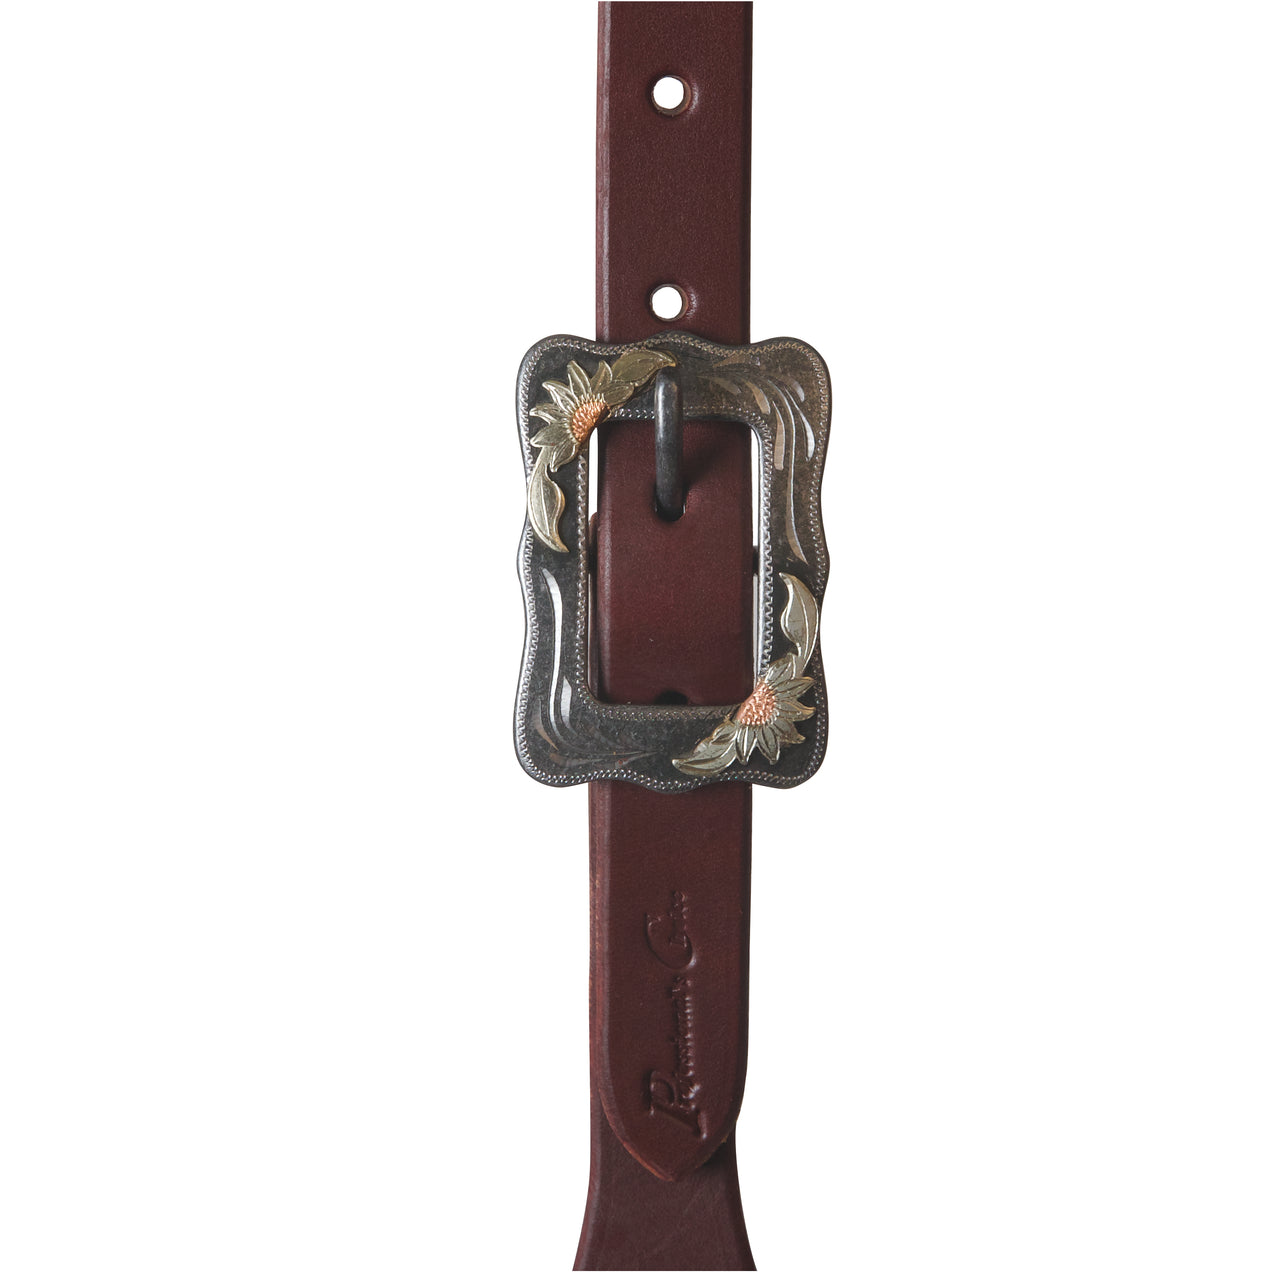 Professional's Choice Ranch 3/4" Browband Headstall - Sunflower Buckle